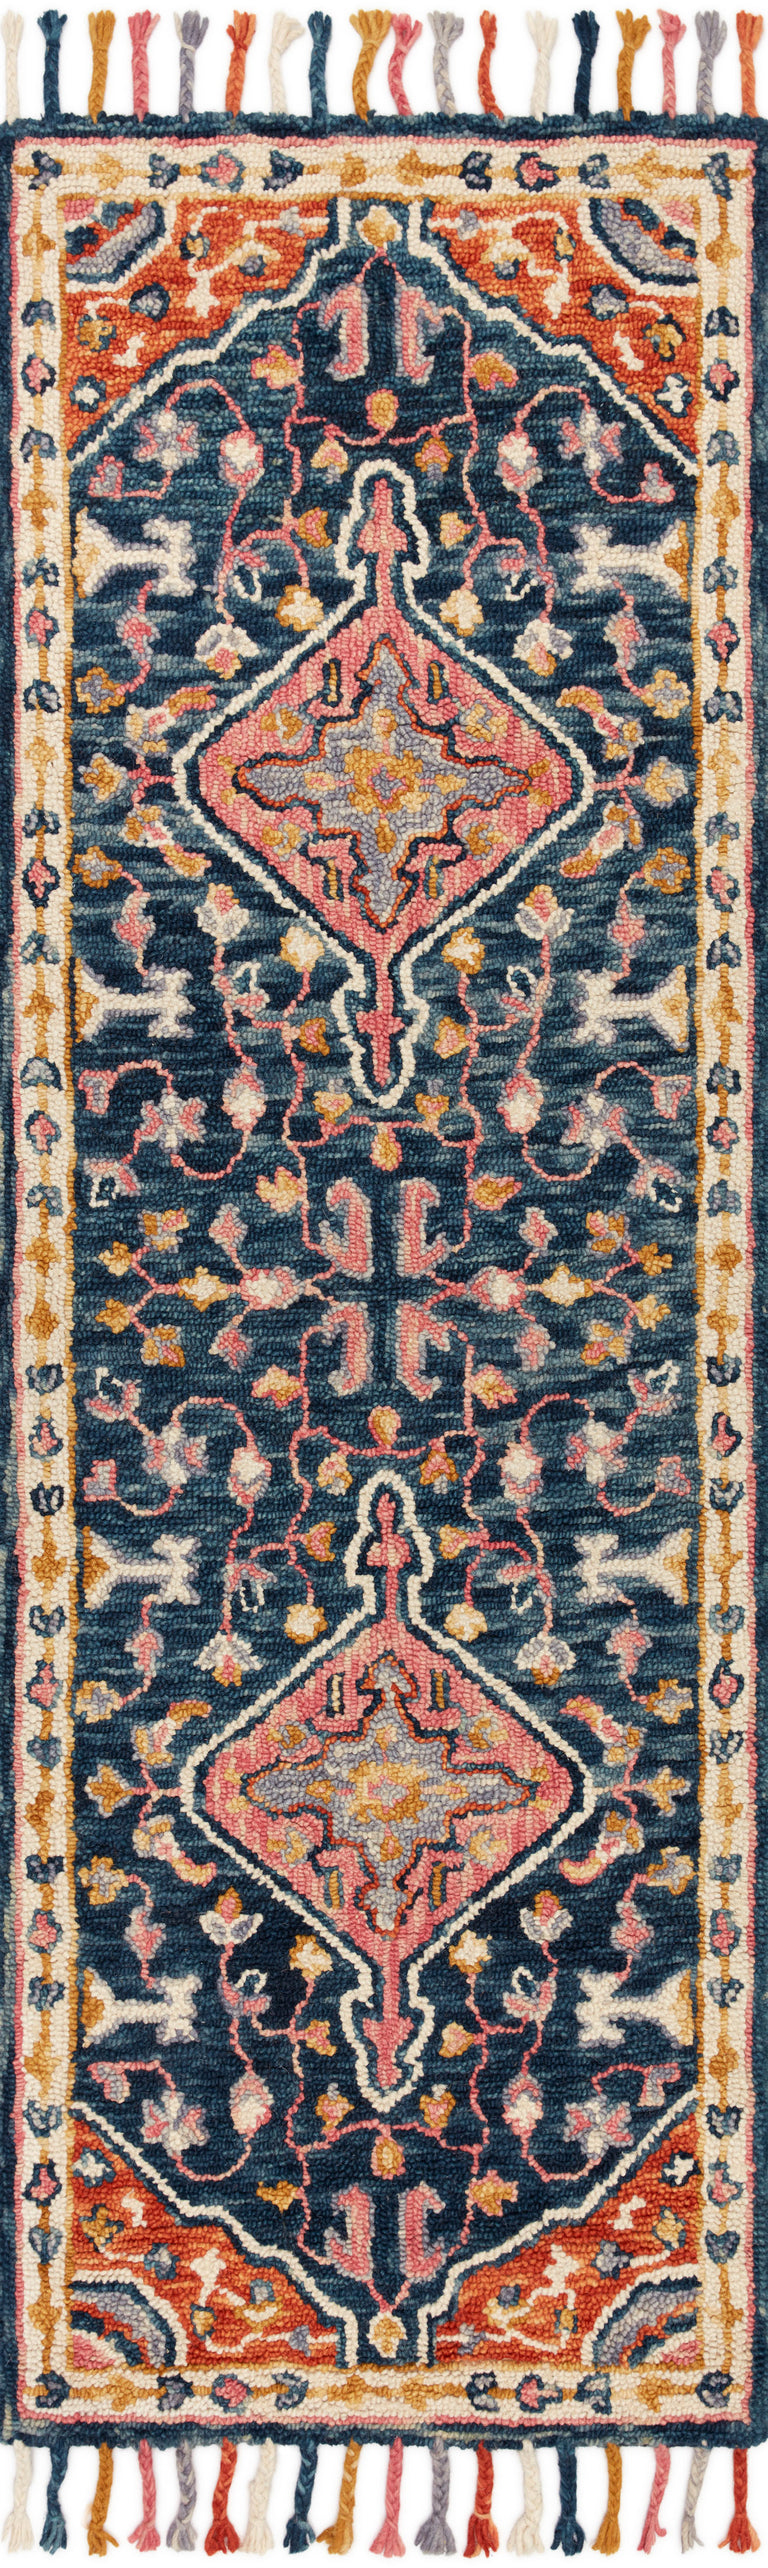 Loloi Rugs Zharah Collection Rug in Navy, Multi - 7'9" x 9'9"